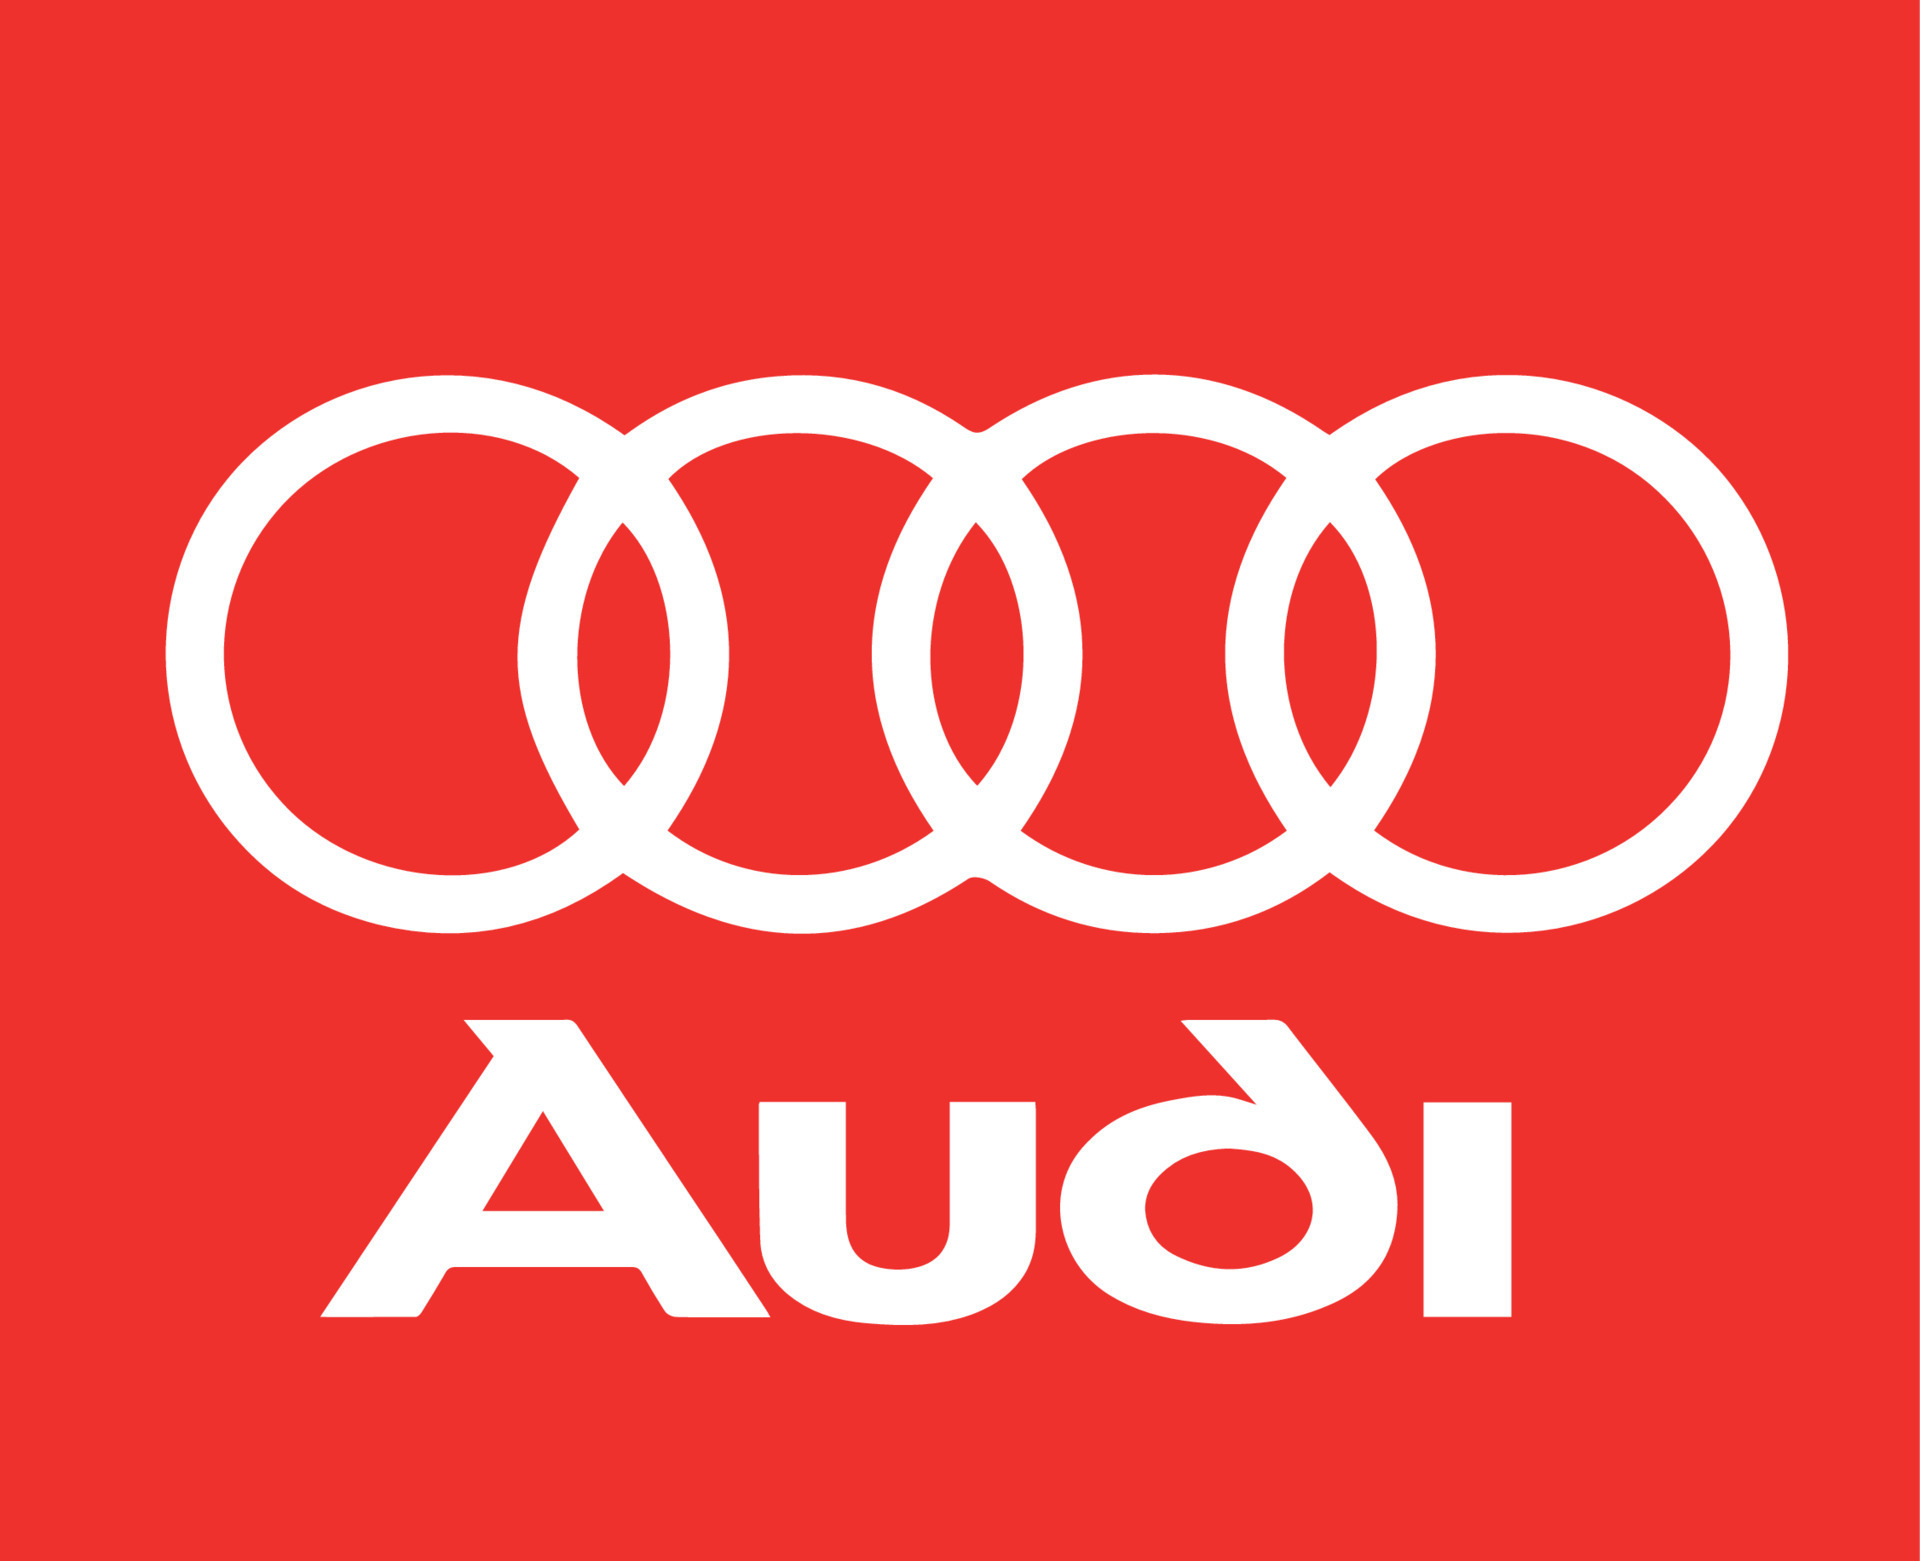 Audi brand symbol logo with name red design Vector Image